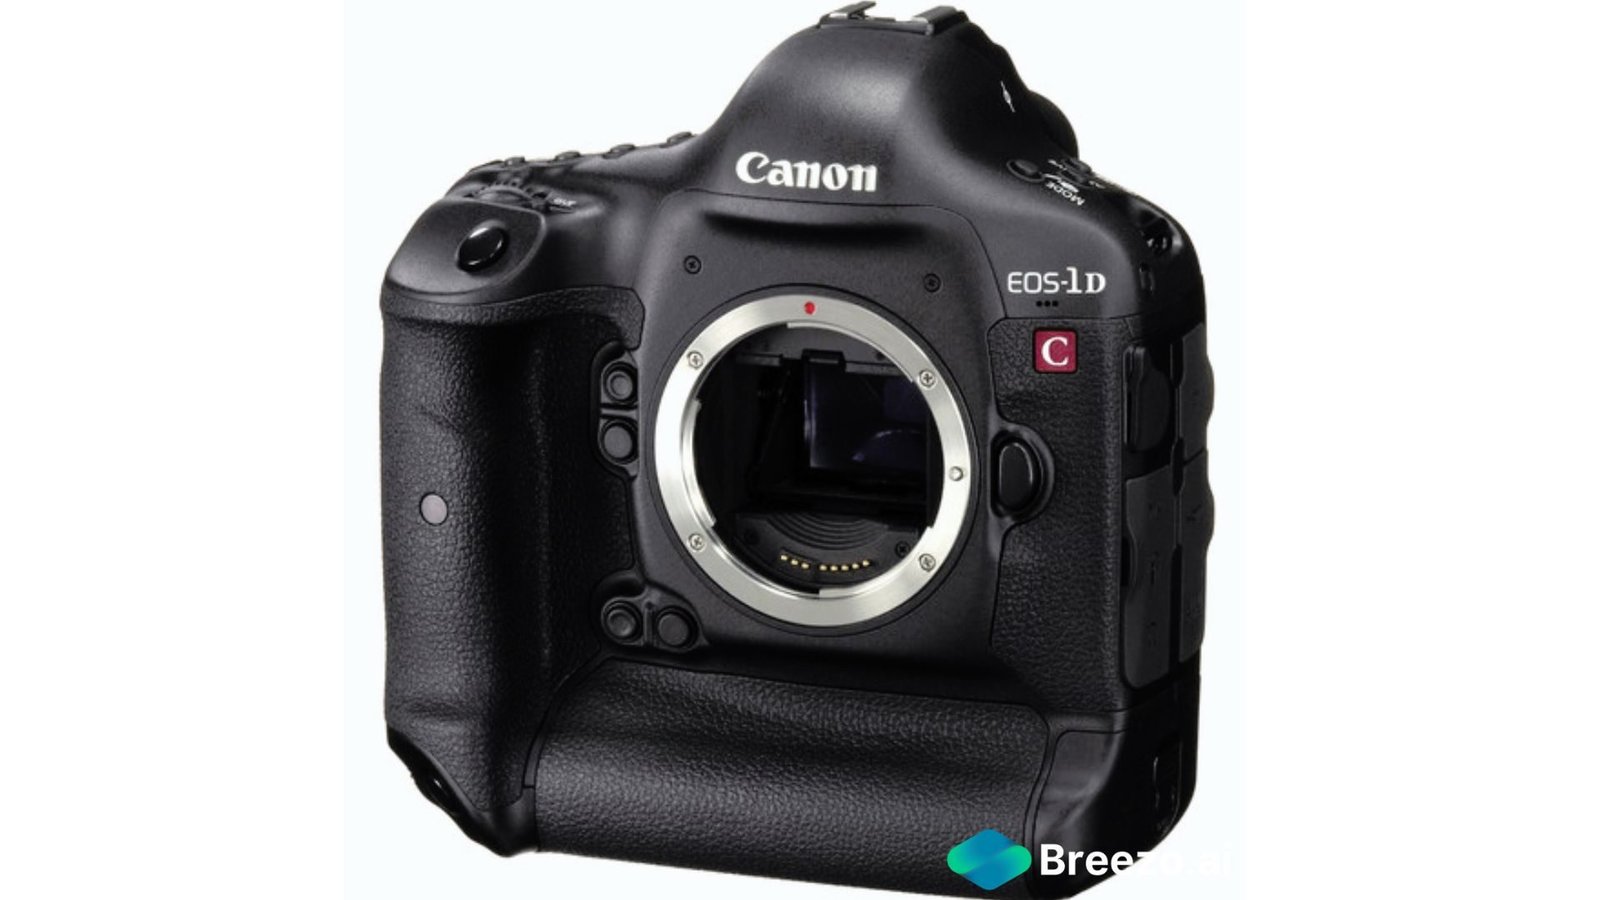 Rent Canon 1-DC Camera Body with with Cp.3 Lens Kit in Delhi NCR, Camera accessories, Camera lenses for rent, in Delhi Gurgaon Noida, hire Shooting equipment, Lighting equipment rental, Film gear rental for Video production, camera rental company in Delhi, film equipment rental company